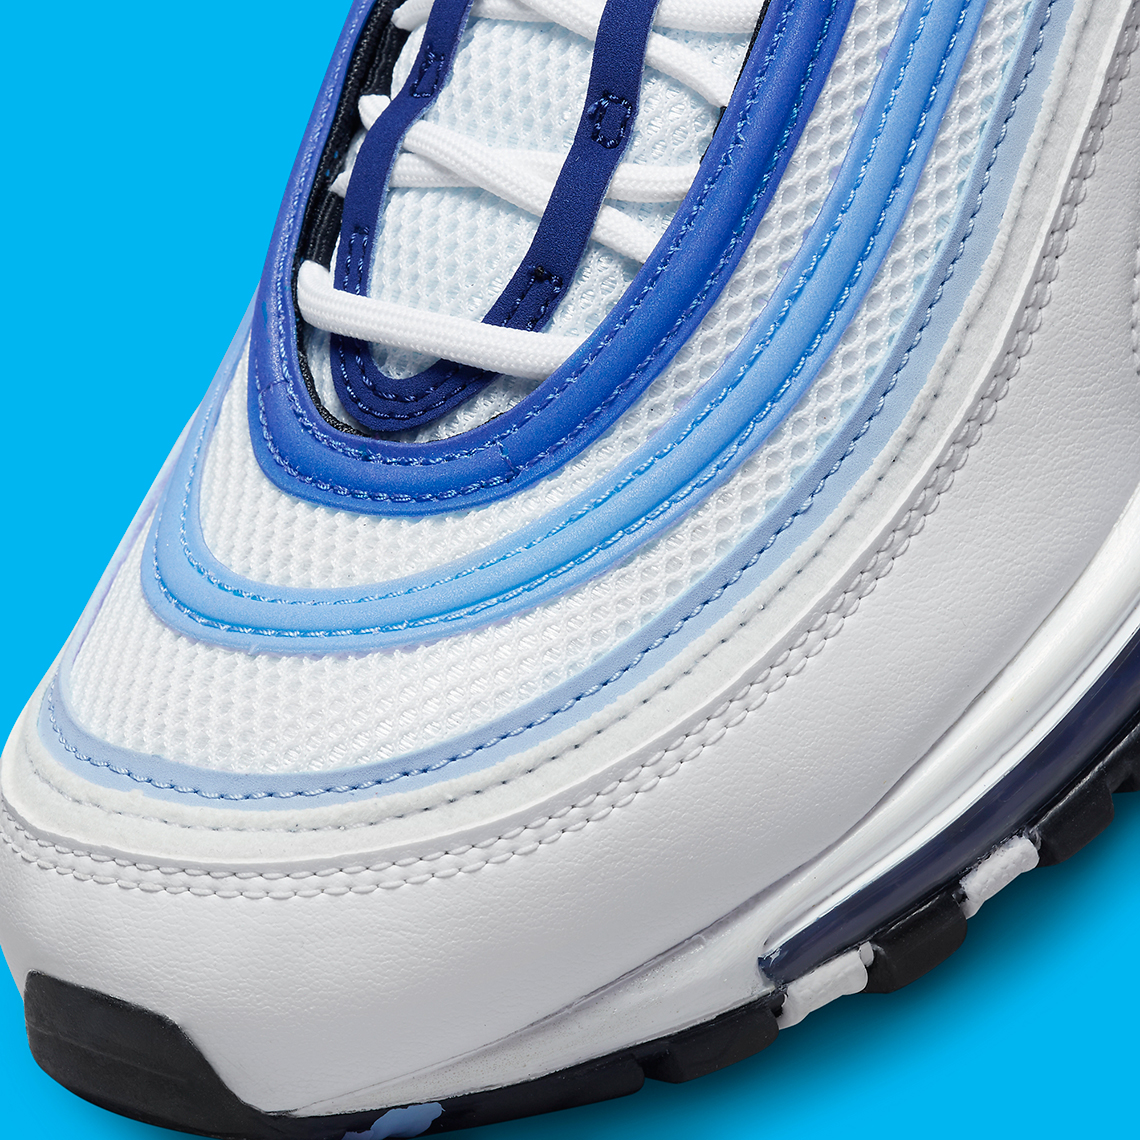 Nike Air Max 97 Blueberry Do8900 100 Release Date 4